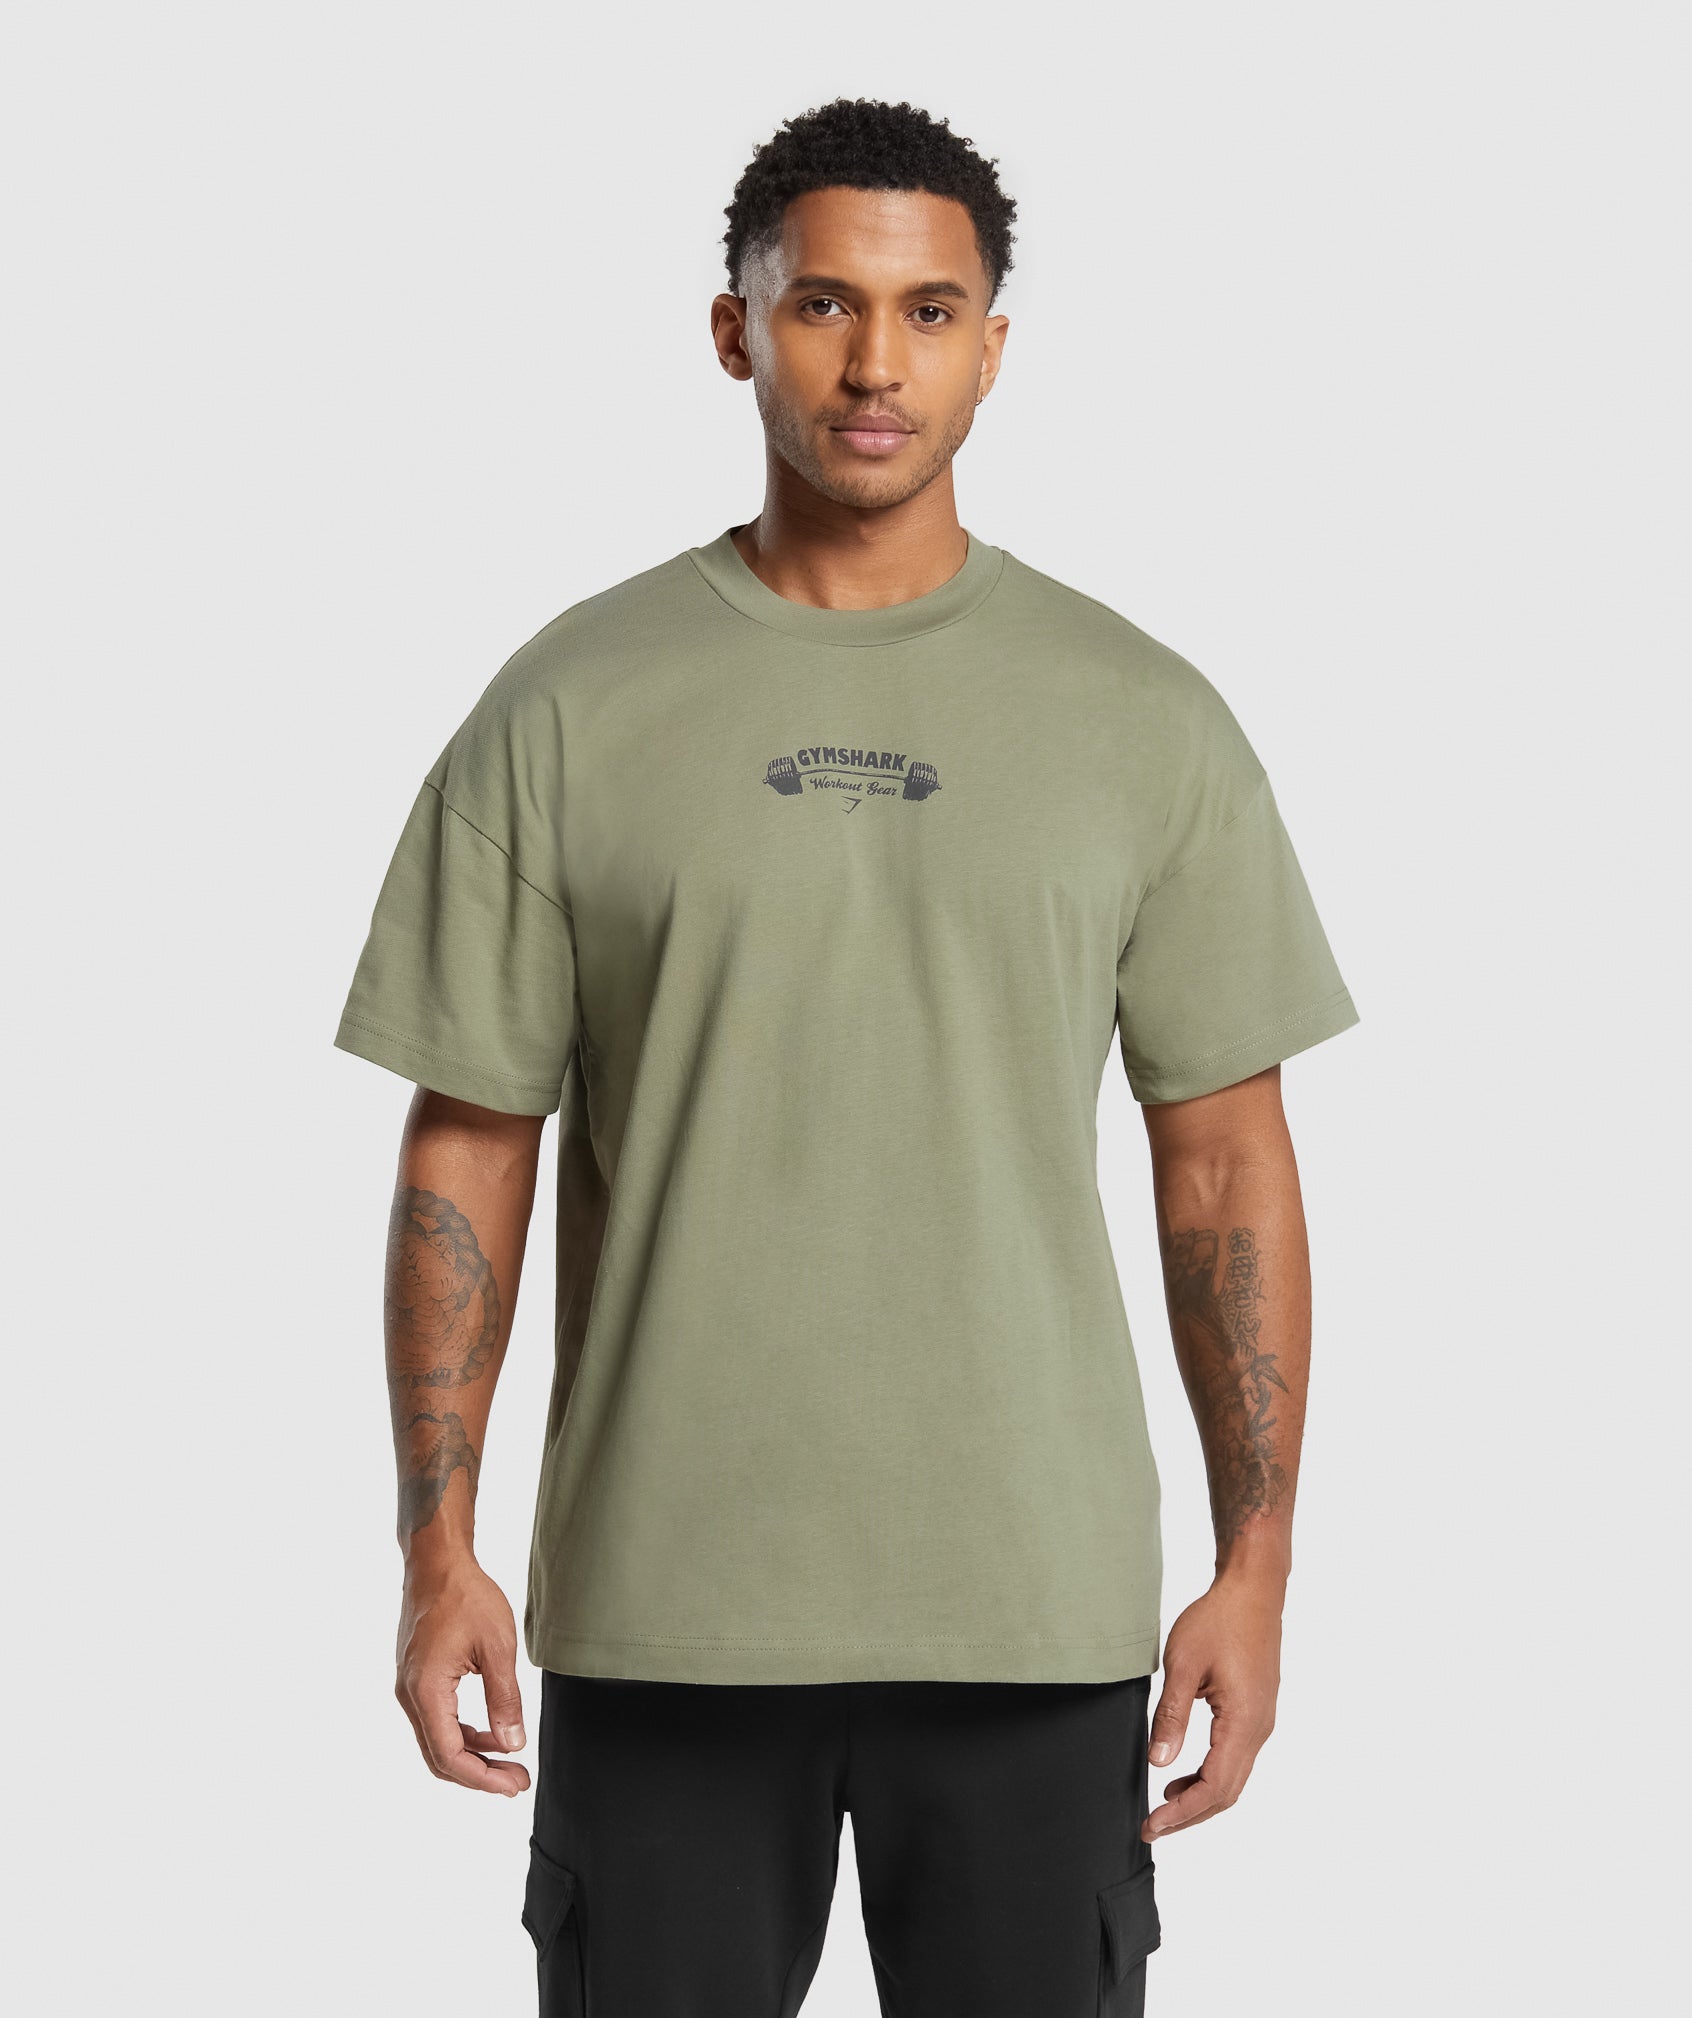 Workout Gear T-Shirt in Utility Green - view 2